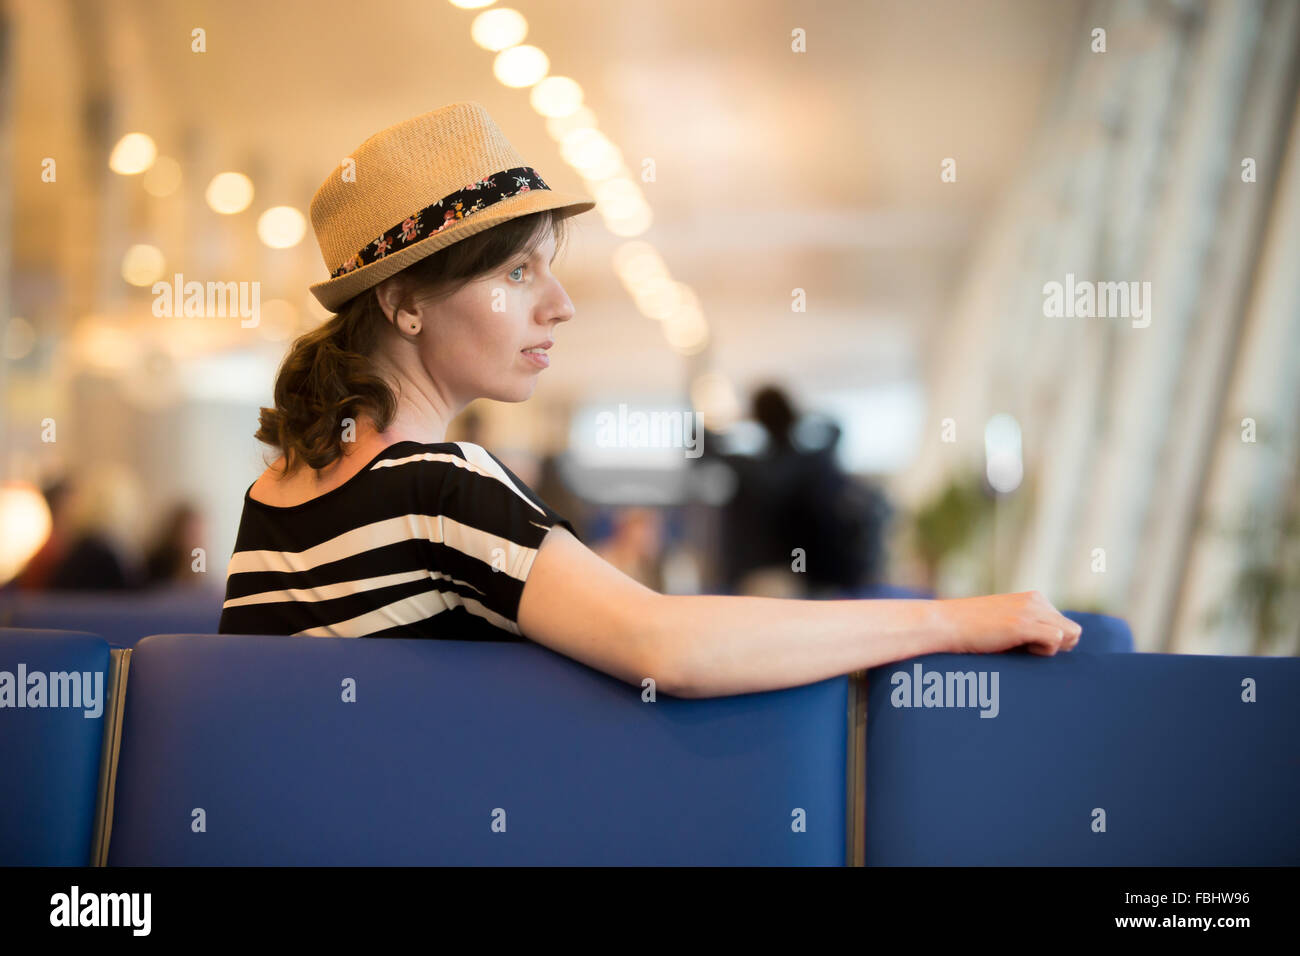 Profile portrait of young traveling woman in summer dress and straw hat waiting for trip, sitting with thoughtful expression in Stock Photo